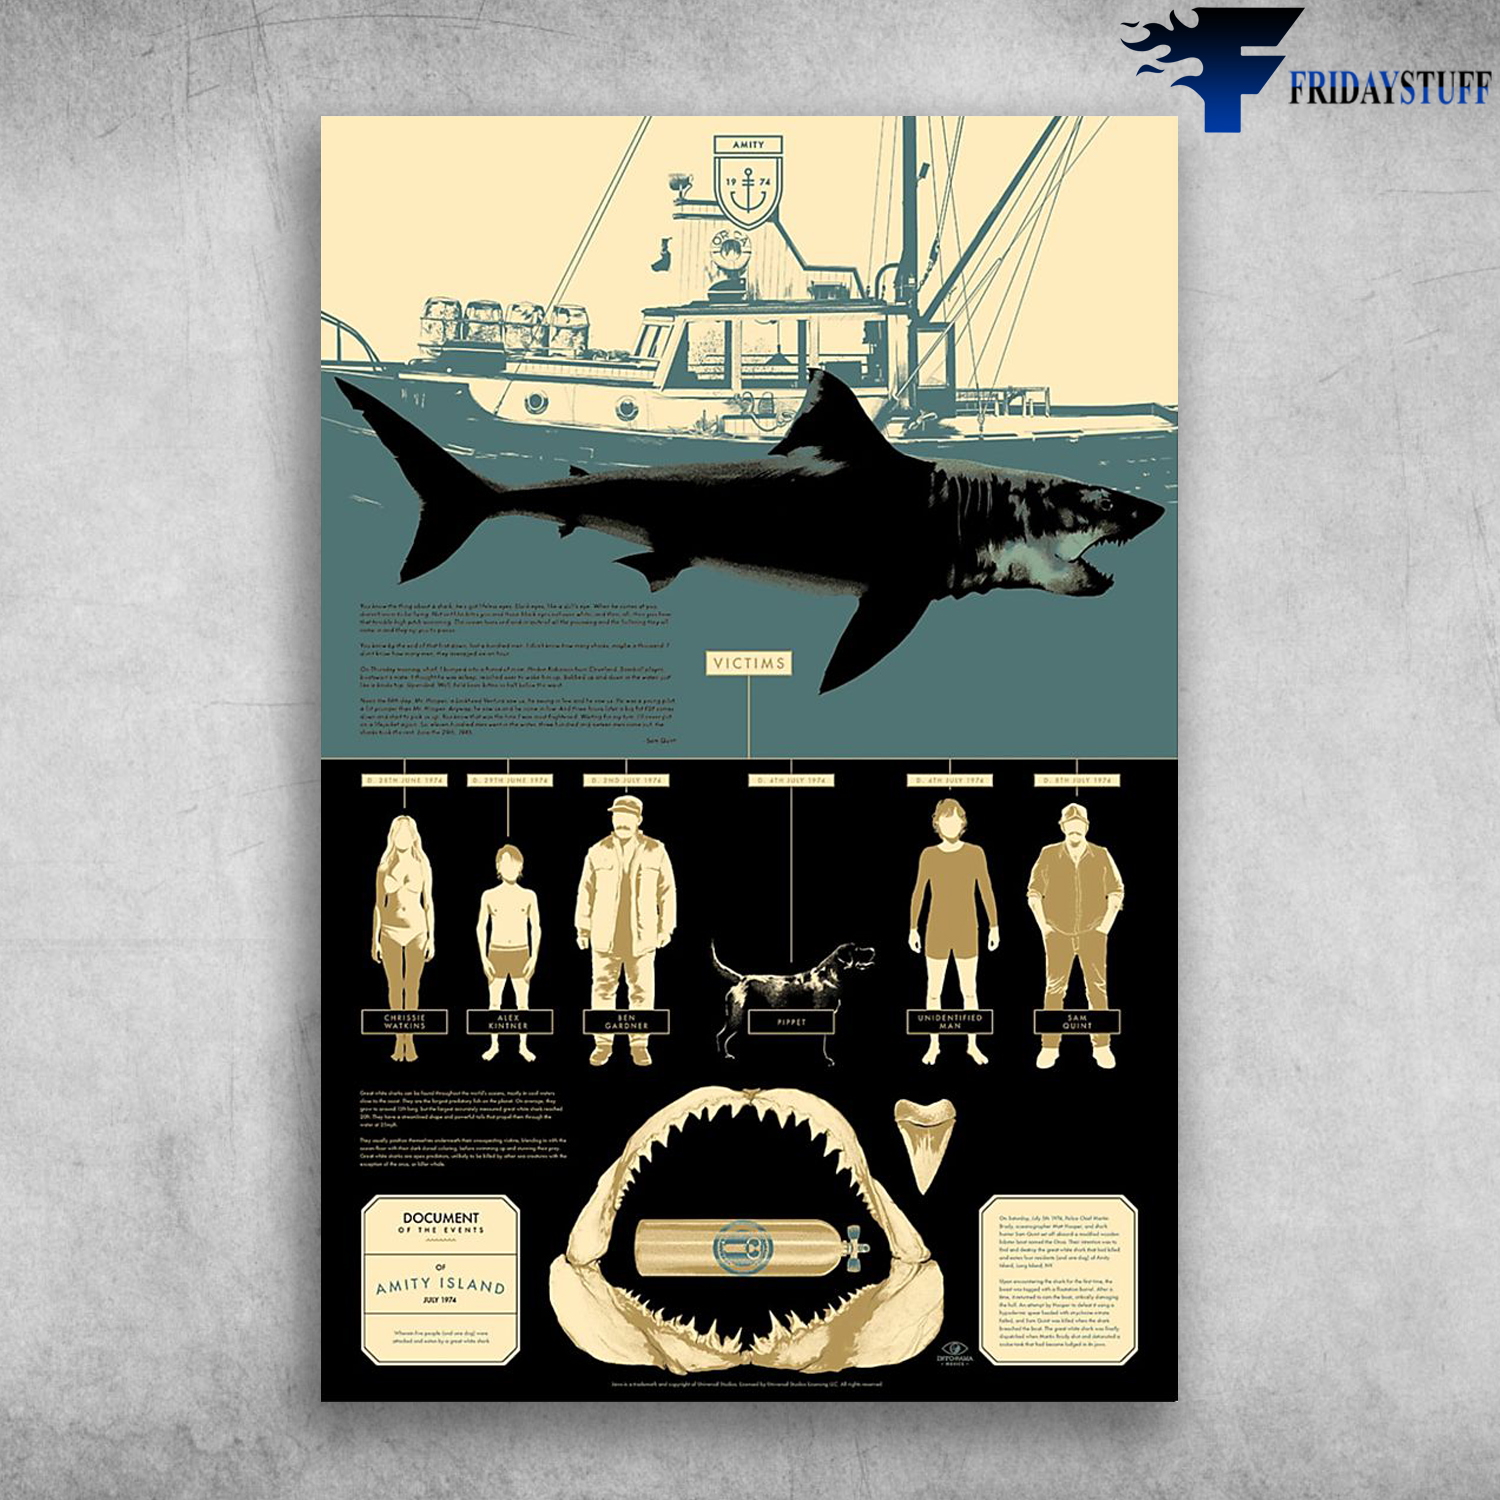 Matt Taylor breaks down the events on Amity Island (1974) in this JAWS infographic poster